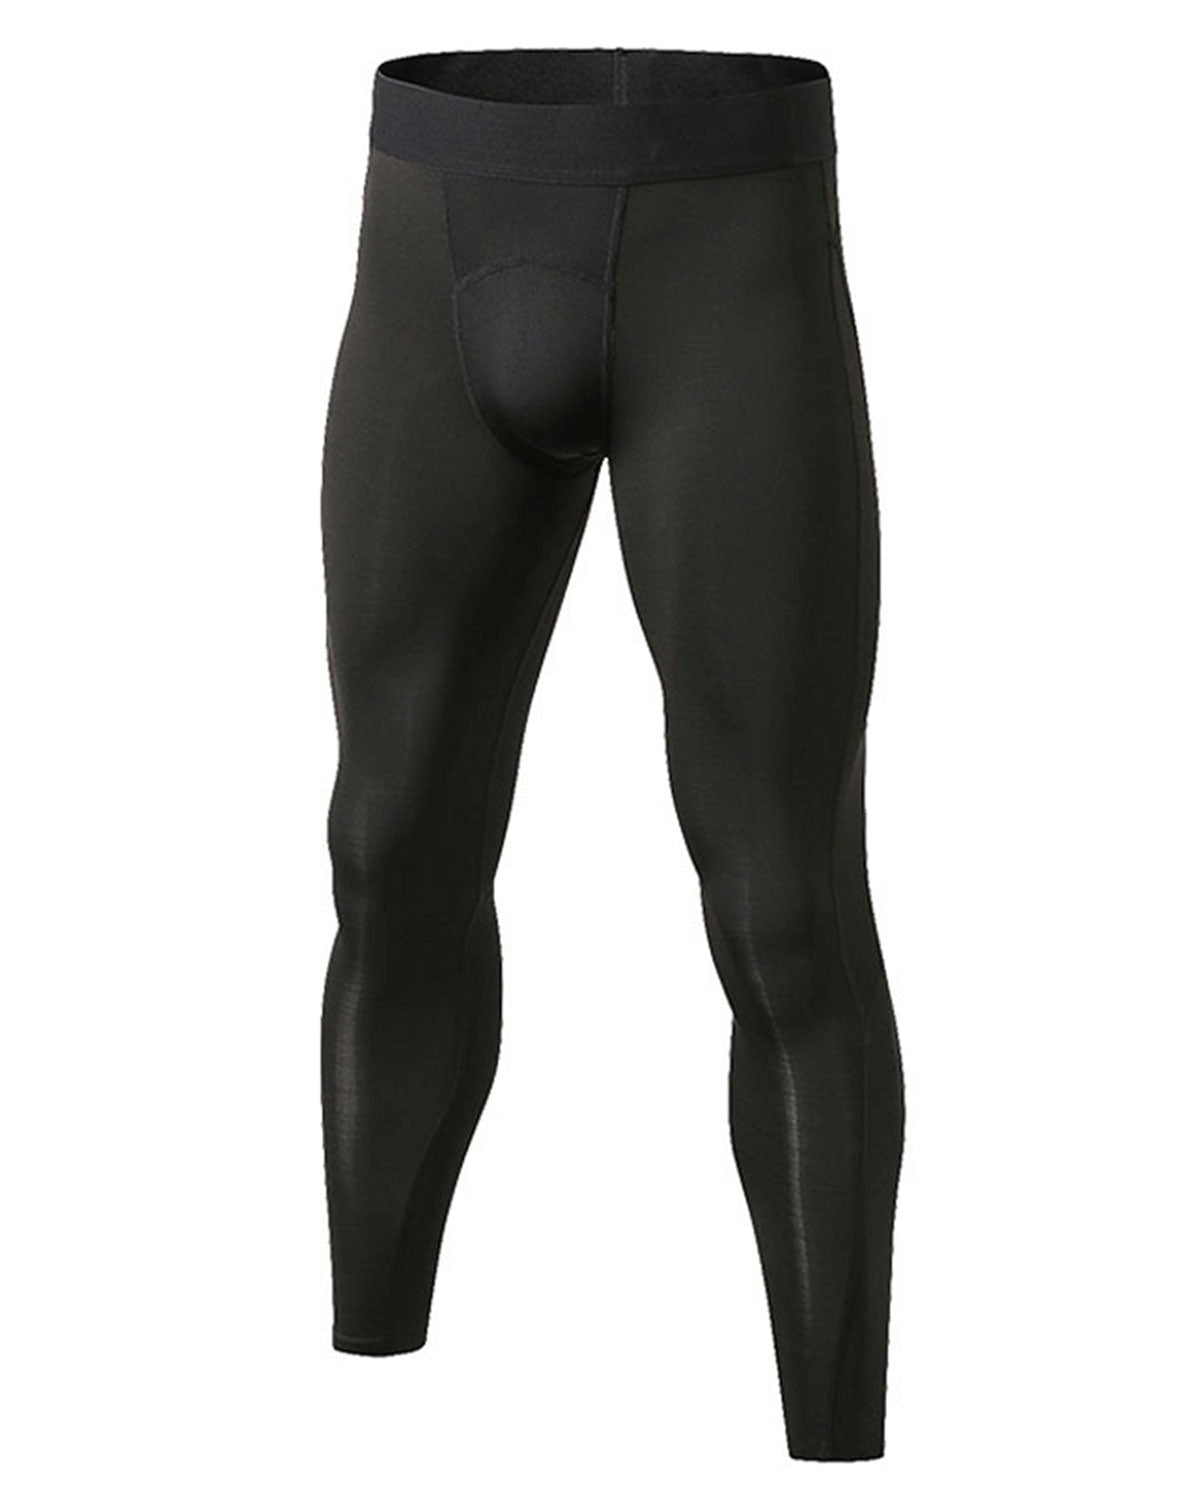 Men's Compression Pants Running Tights Leggings with Phone Pocket